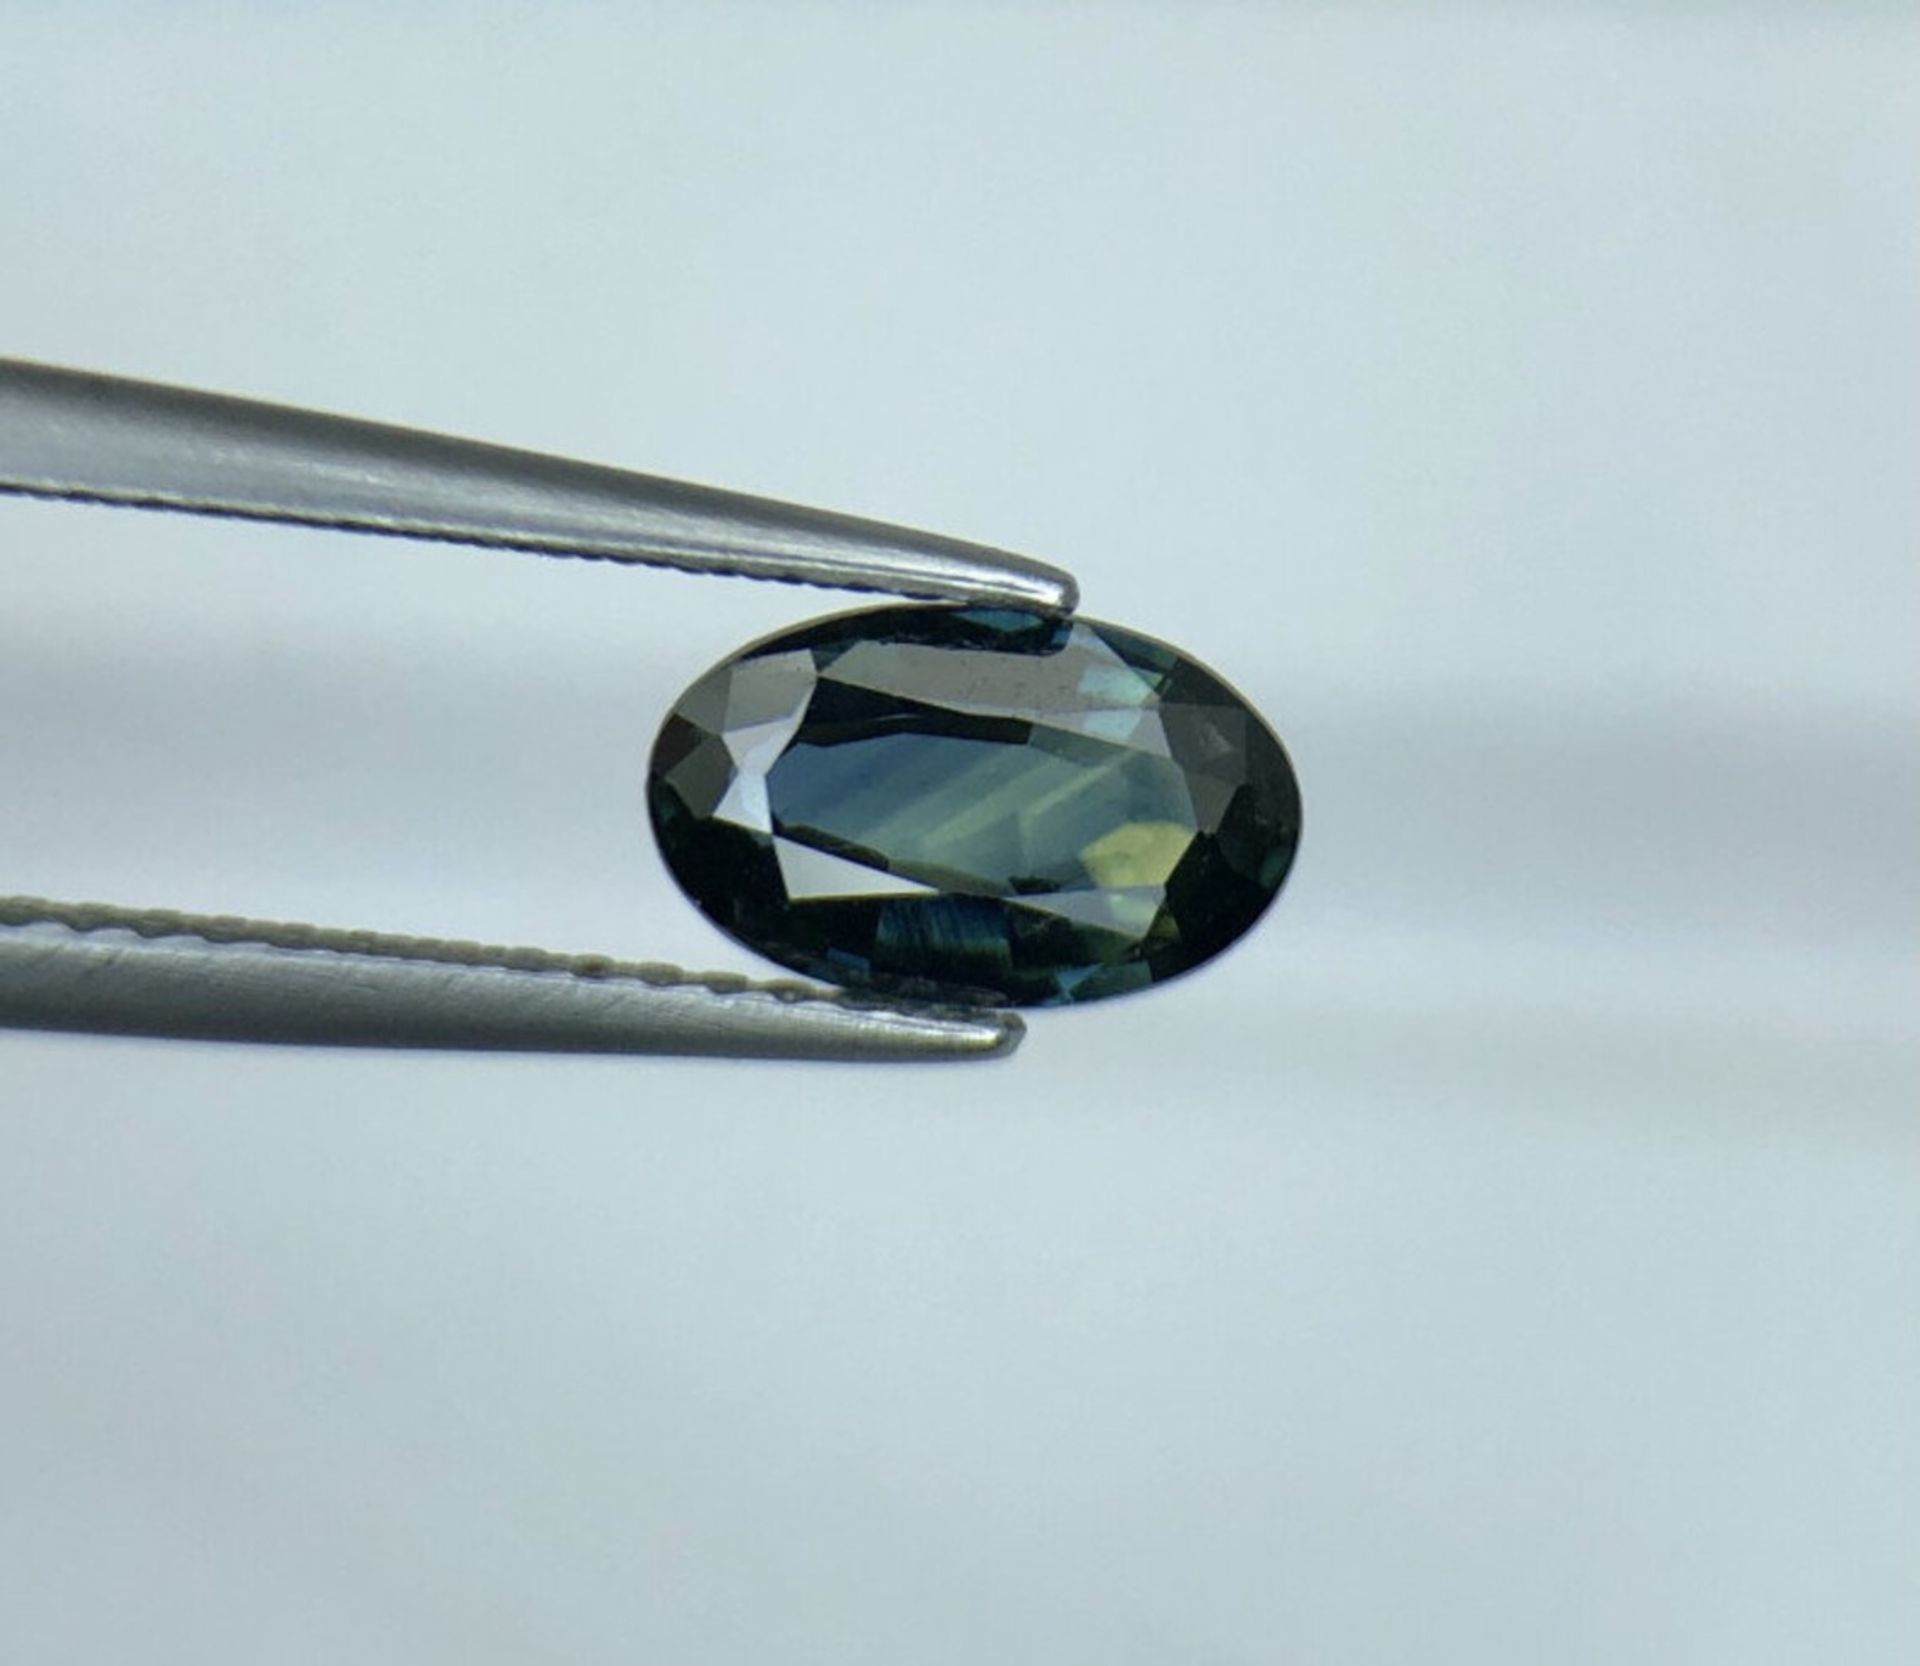 Certified Parti Sapphire 1.15ct, Natural No Treatment Gemstone. - Image 4 of 4